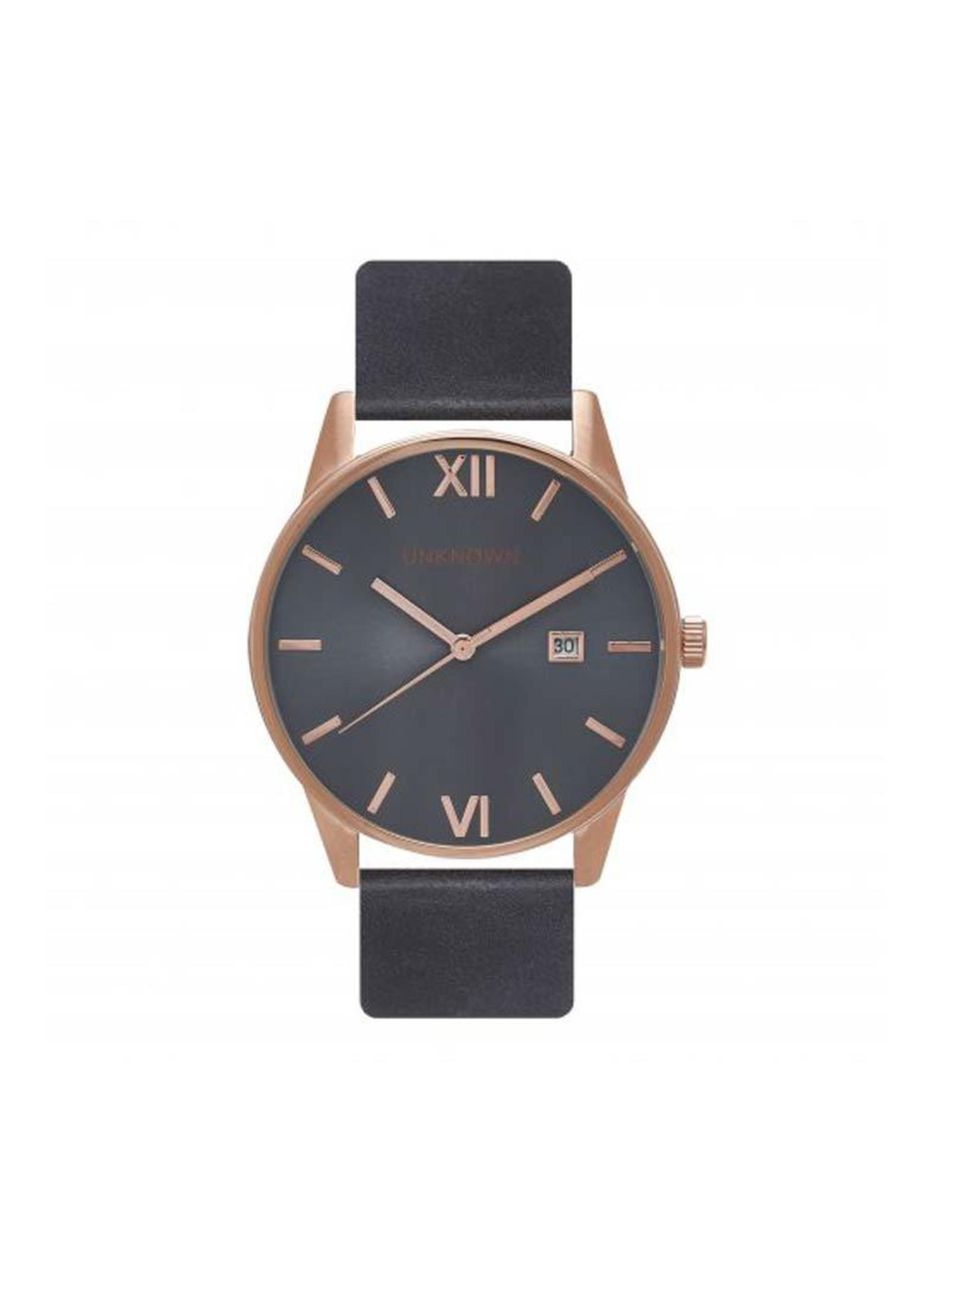 <p>This masculine watch will give your work wardrobe an edge.</p>

<p><a href="http://www.unknownwatches.com/the-dandy-c20/the-dandy-navy-and-rose-gold-p142" target="_blank">Unknown</a> watch, £85</p>